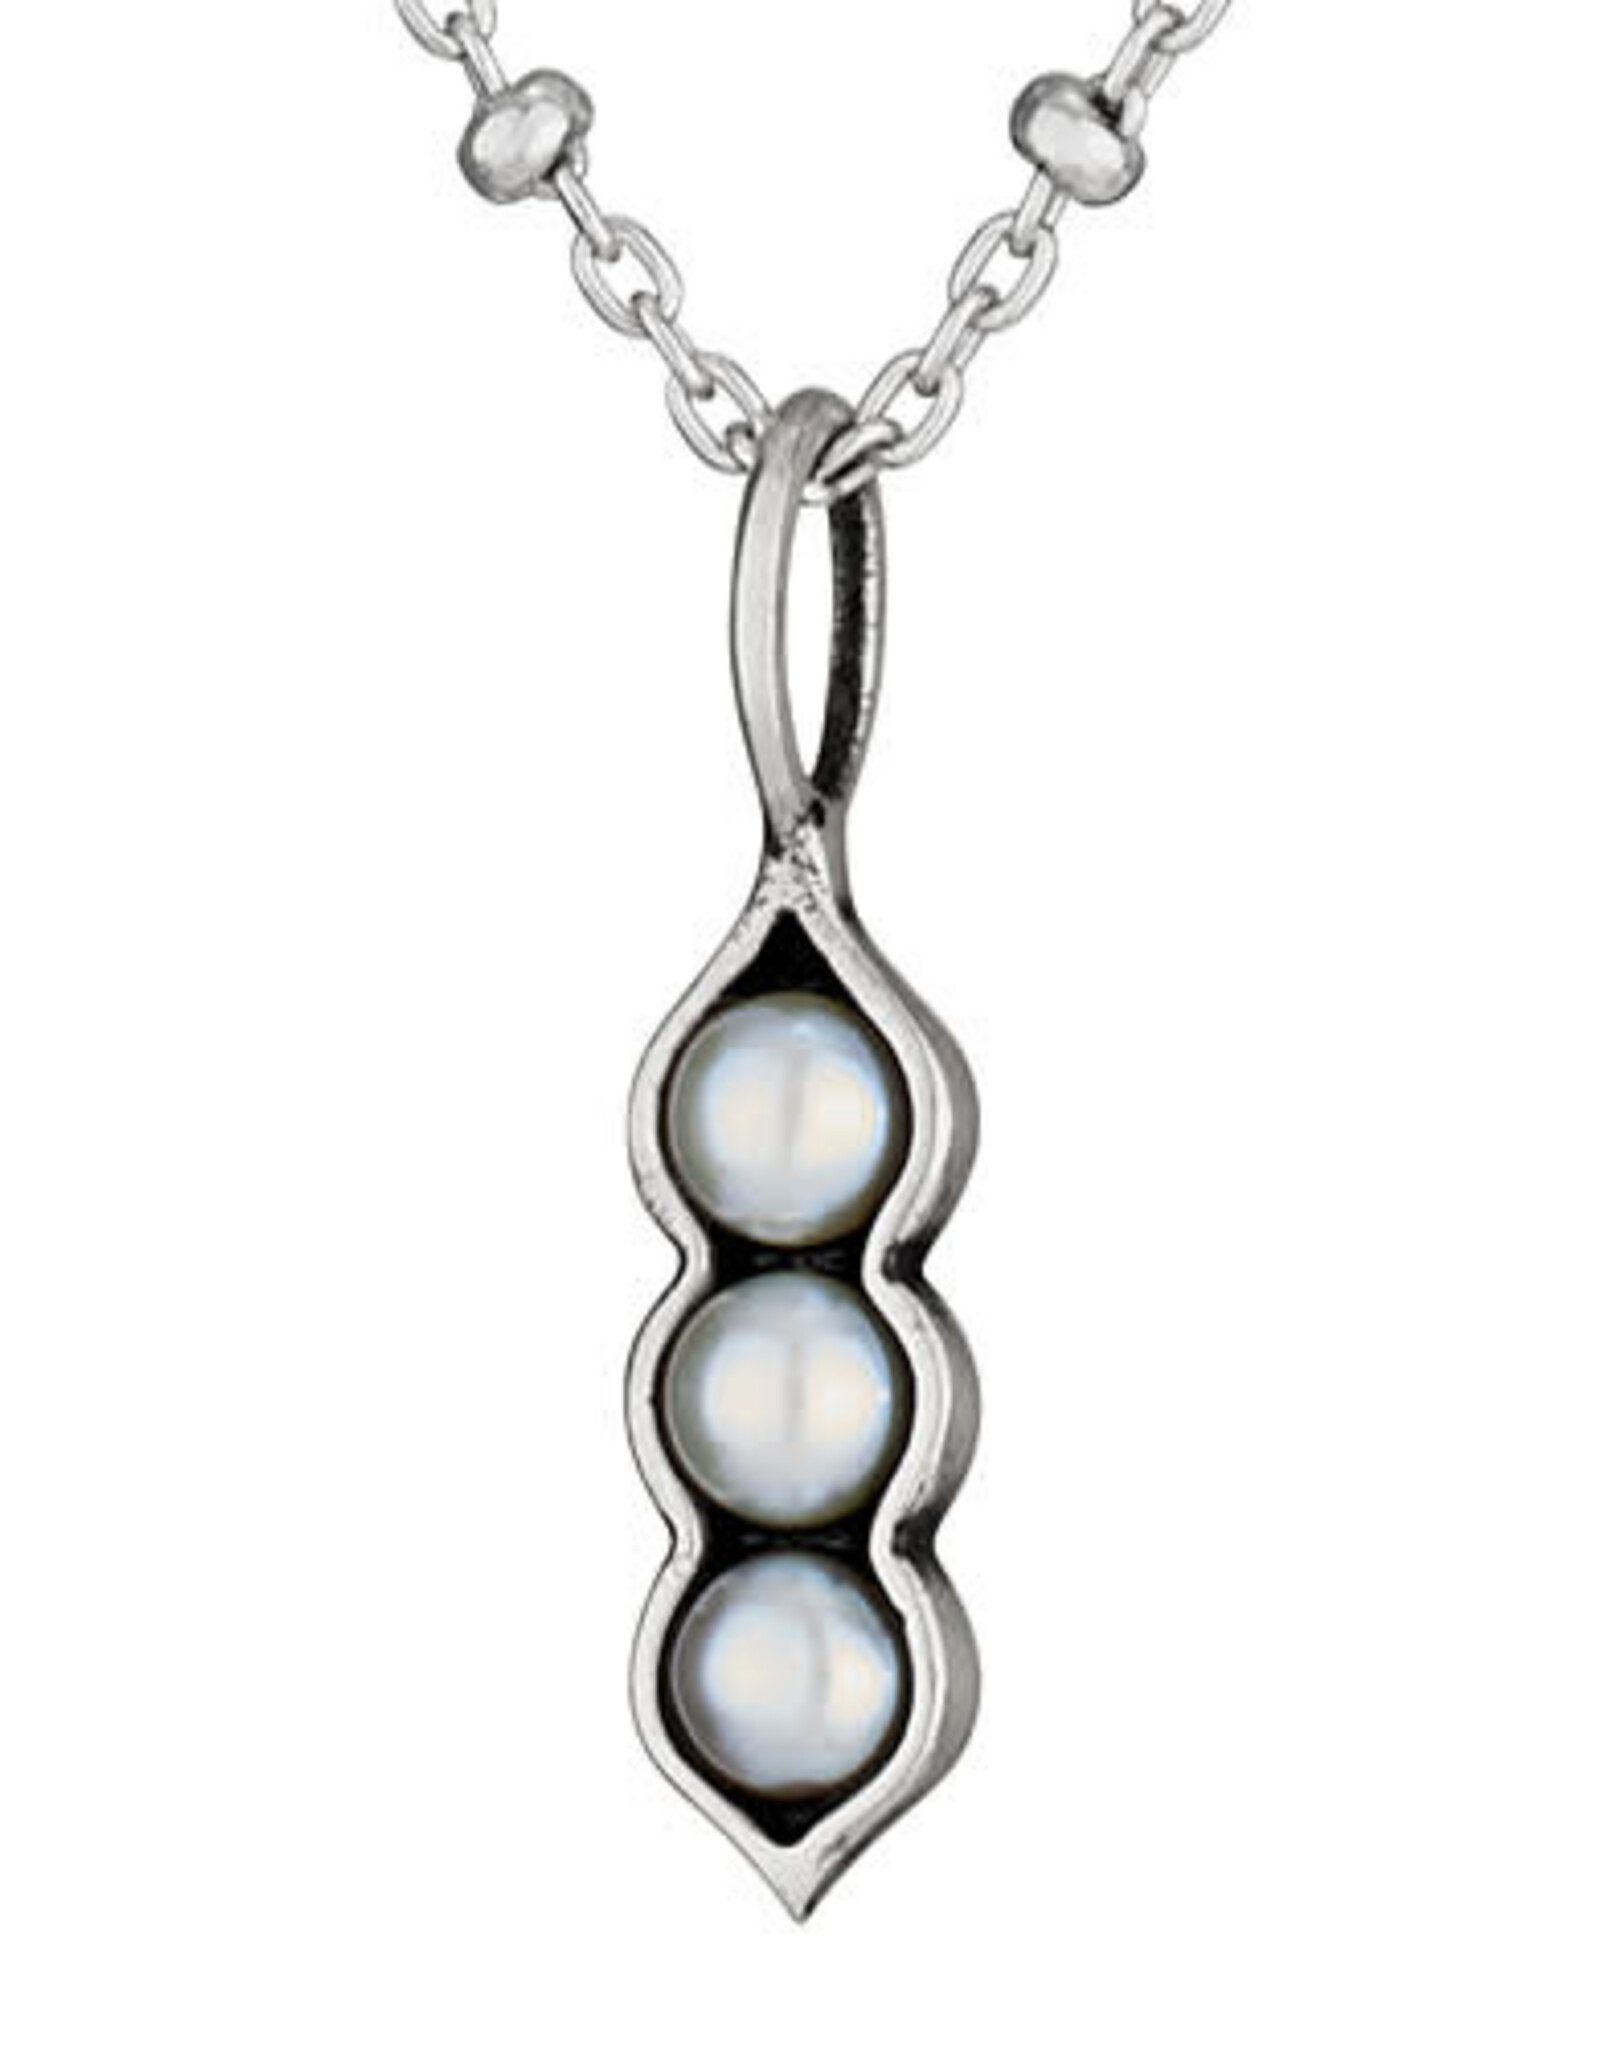 Tiger Mountain THREE PEARL PEA POD NECKLACE - sterling silver